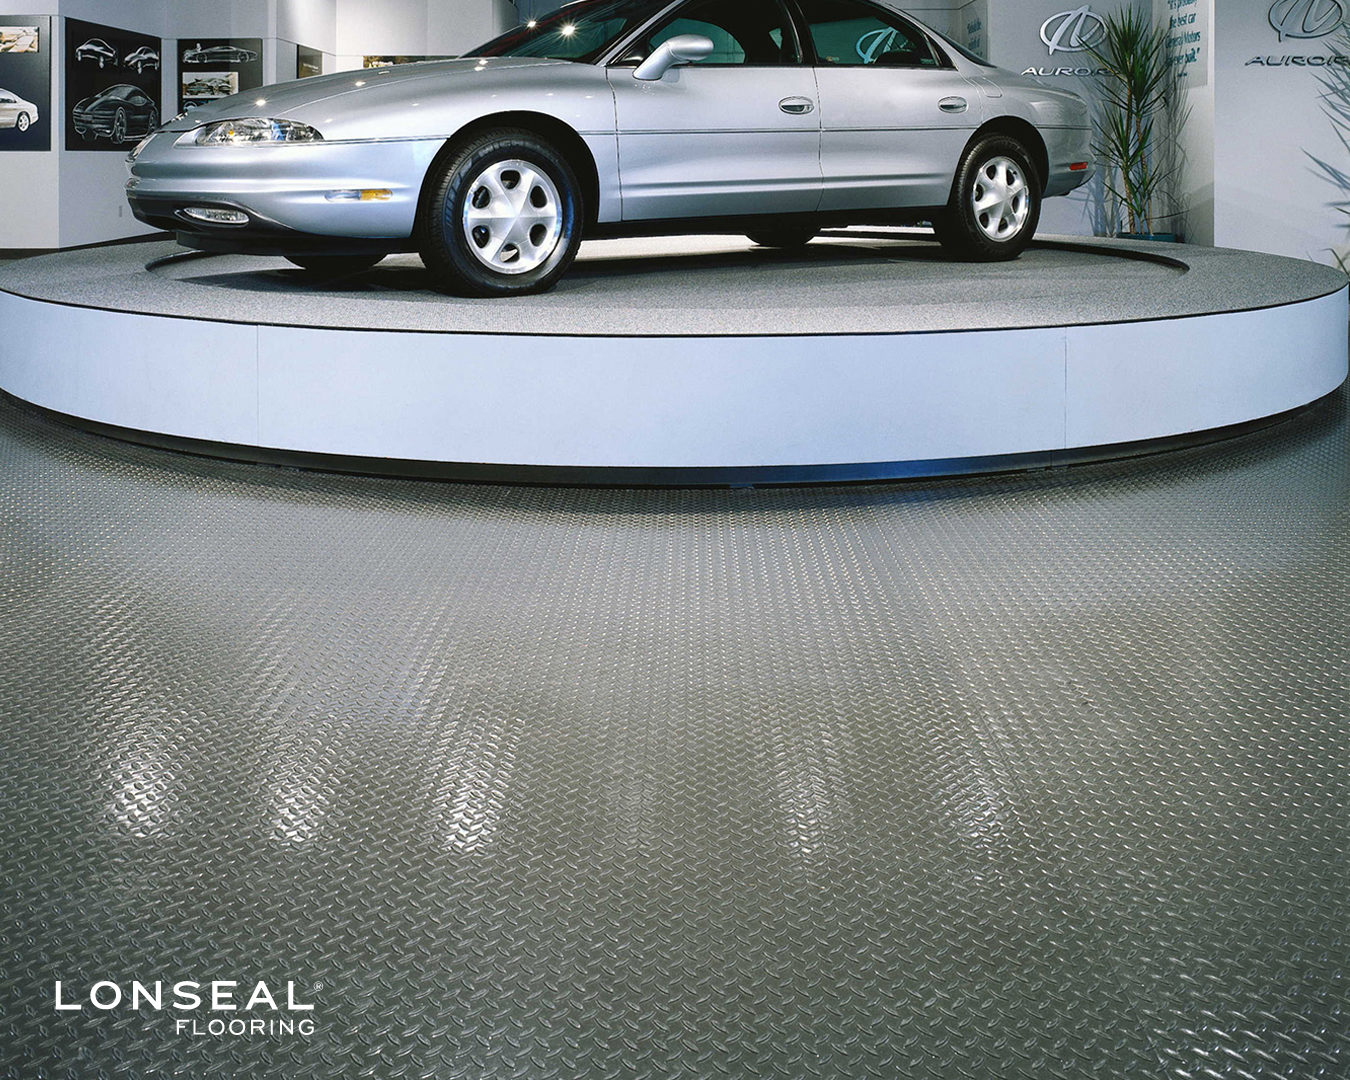 Lonseal, Sheet Vinyl Flooring, LONPLATE® I offer the rugged endurance of classic steel plating. This durable resilient sheet